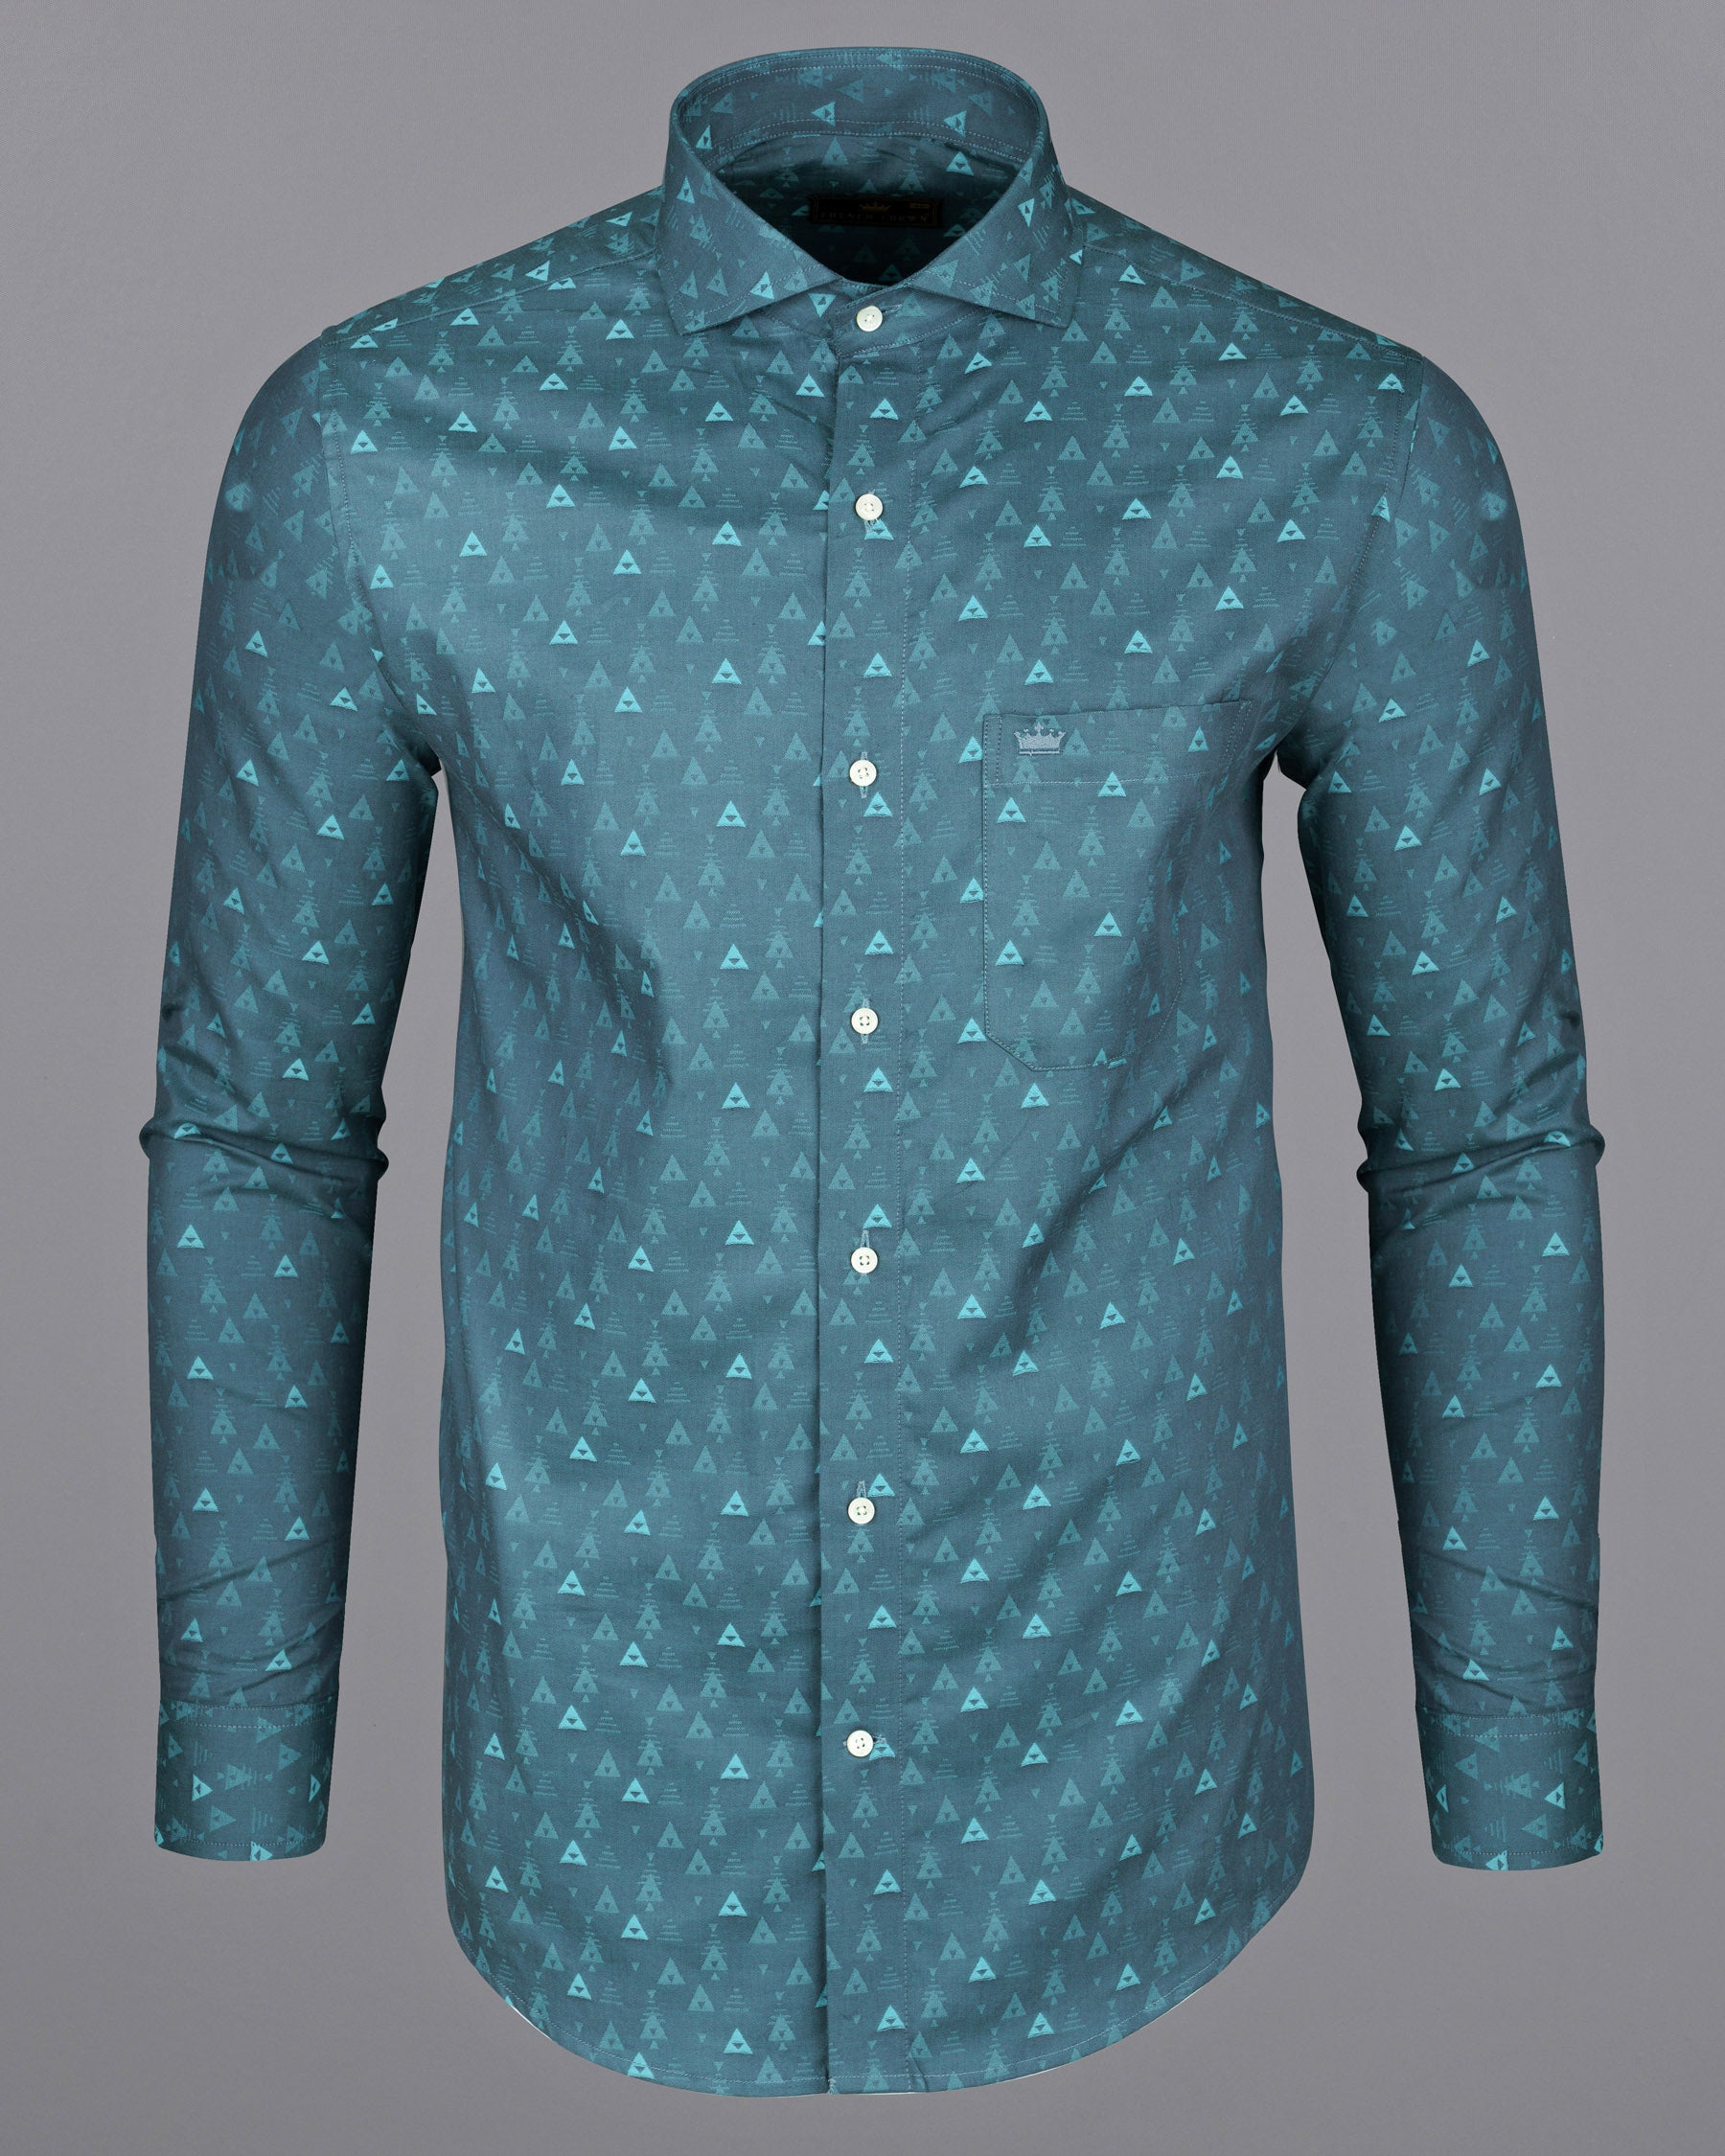 Cadet and Neptune Jacquard Triangle Textured Premium Giza Cotton Shirt  6759-CA-38,6759-CA-38,6759-CA-39,6759-CA-39,6759-CA-40,6759-CA-40,6759-CA-42,6759-CA-42,6759-CA-44,6759-CA-44,6759-CA-46,6759-CA-46,6759-CA-48,6759-CA-48,6759-CA-50,6759-CA-50,6759-CA-52,6759-CA-52